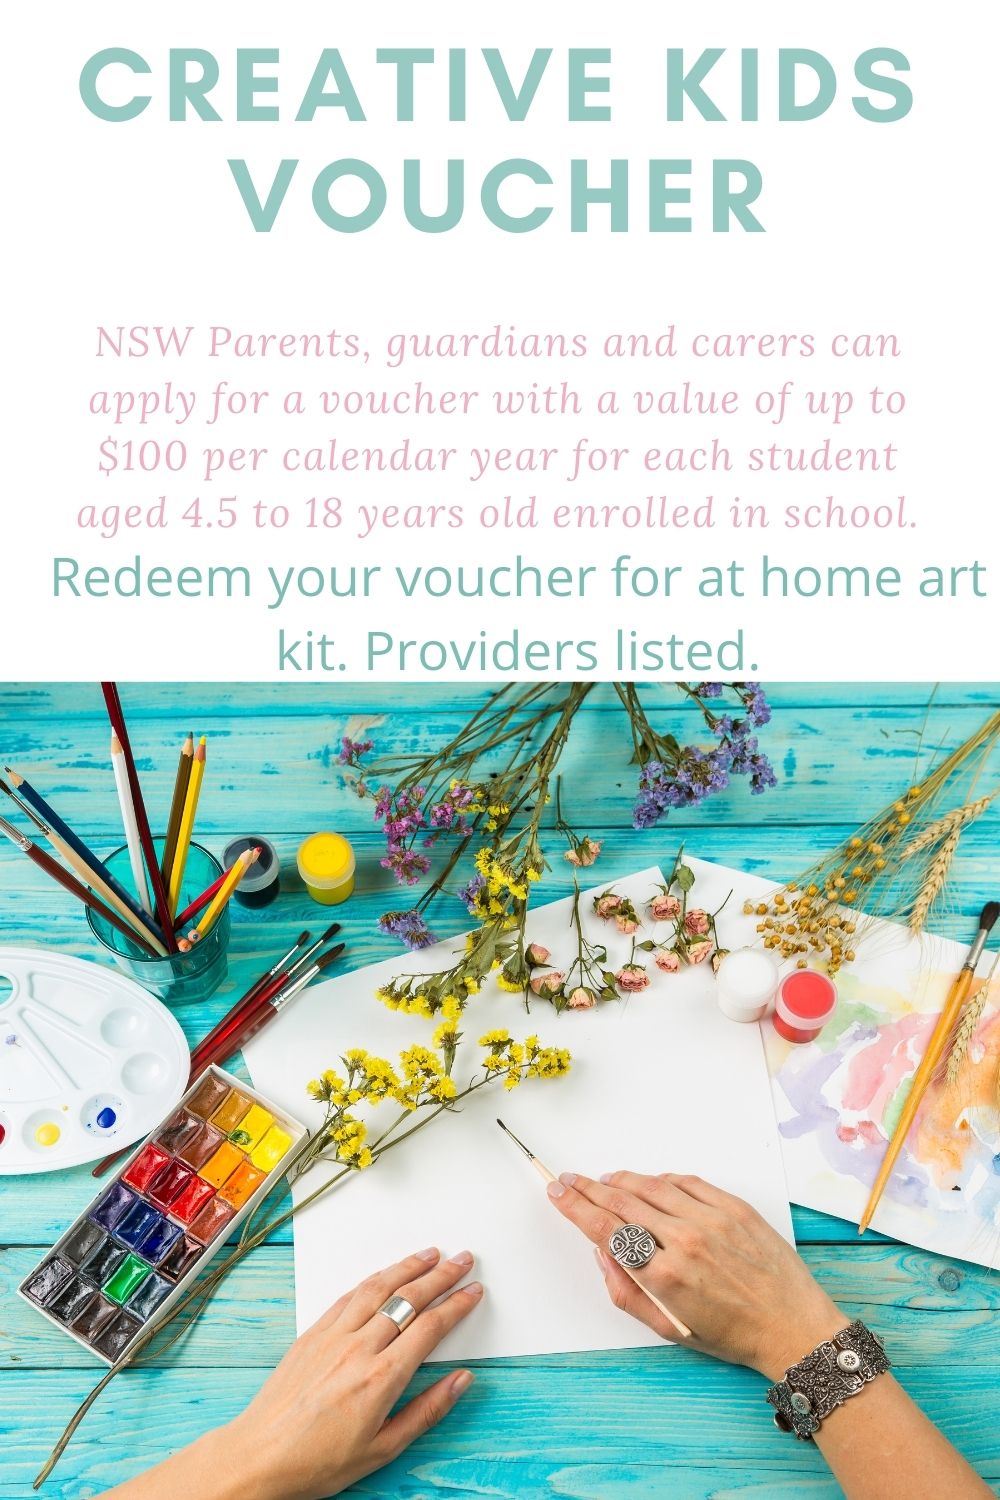 Creative Kids Voucher for NSW Kids : Creative Kits for Home